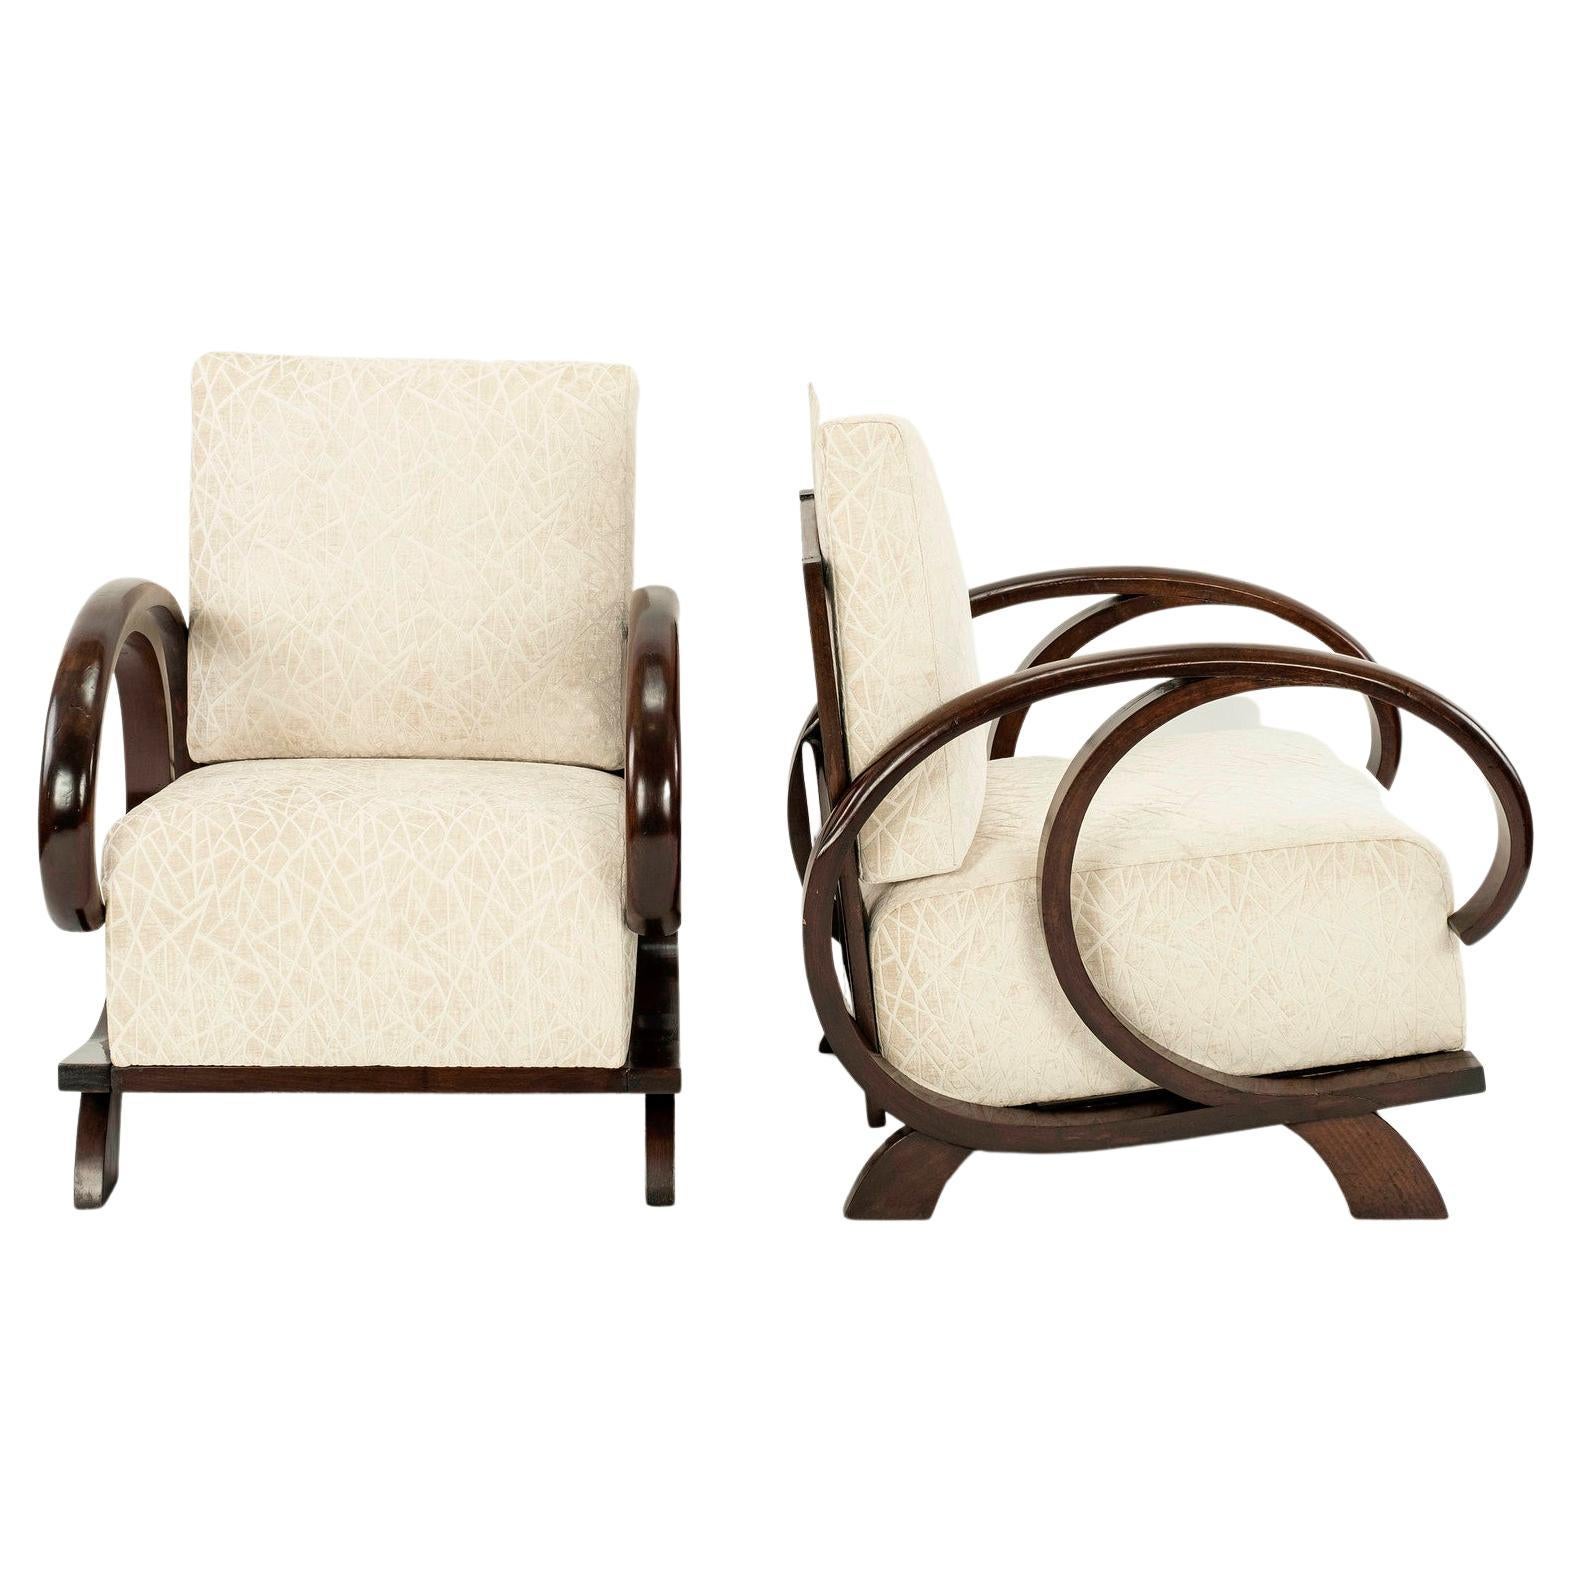 A pair of French Deco walnut stained hardwood lounge chairs newly upholstered in an ivory cut chenille velvet.
 